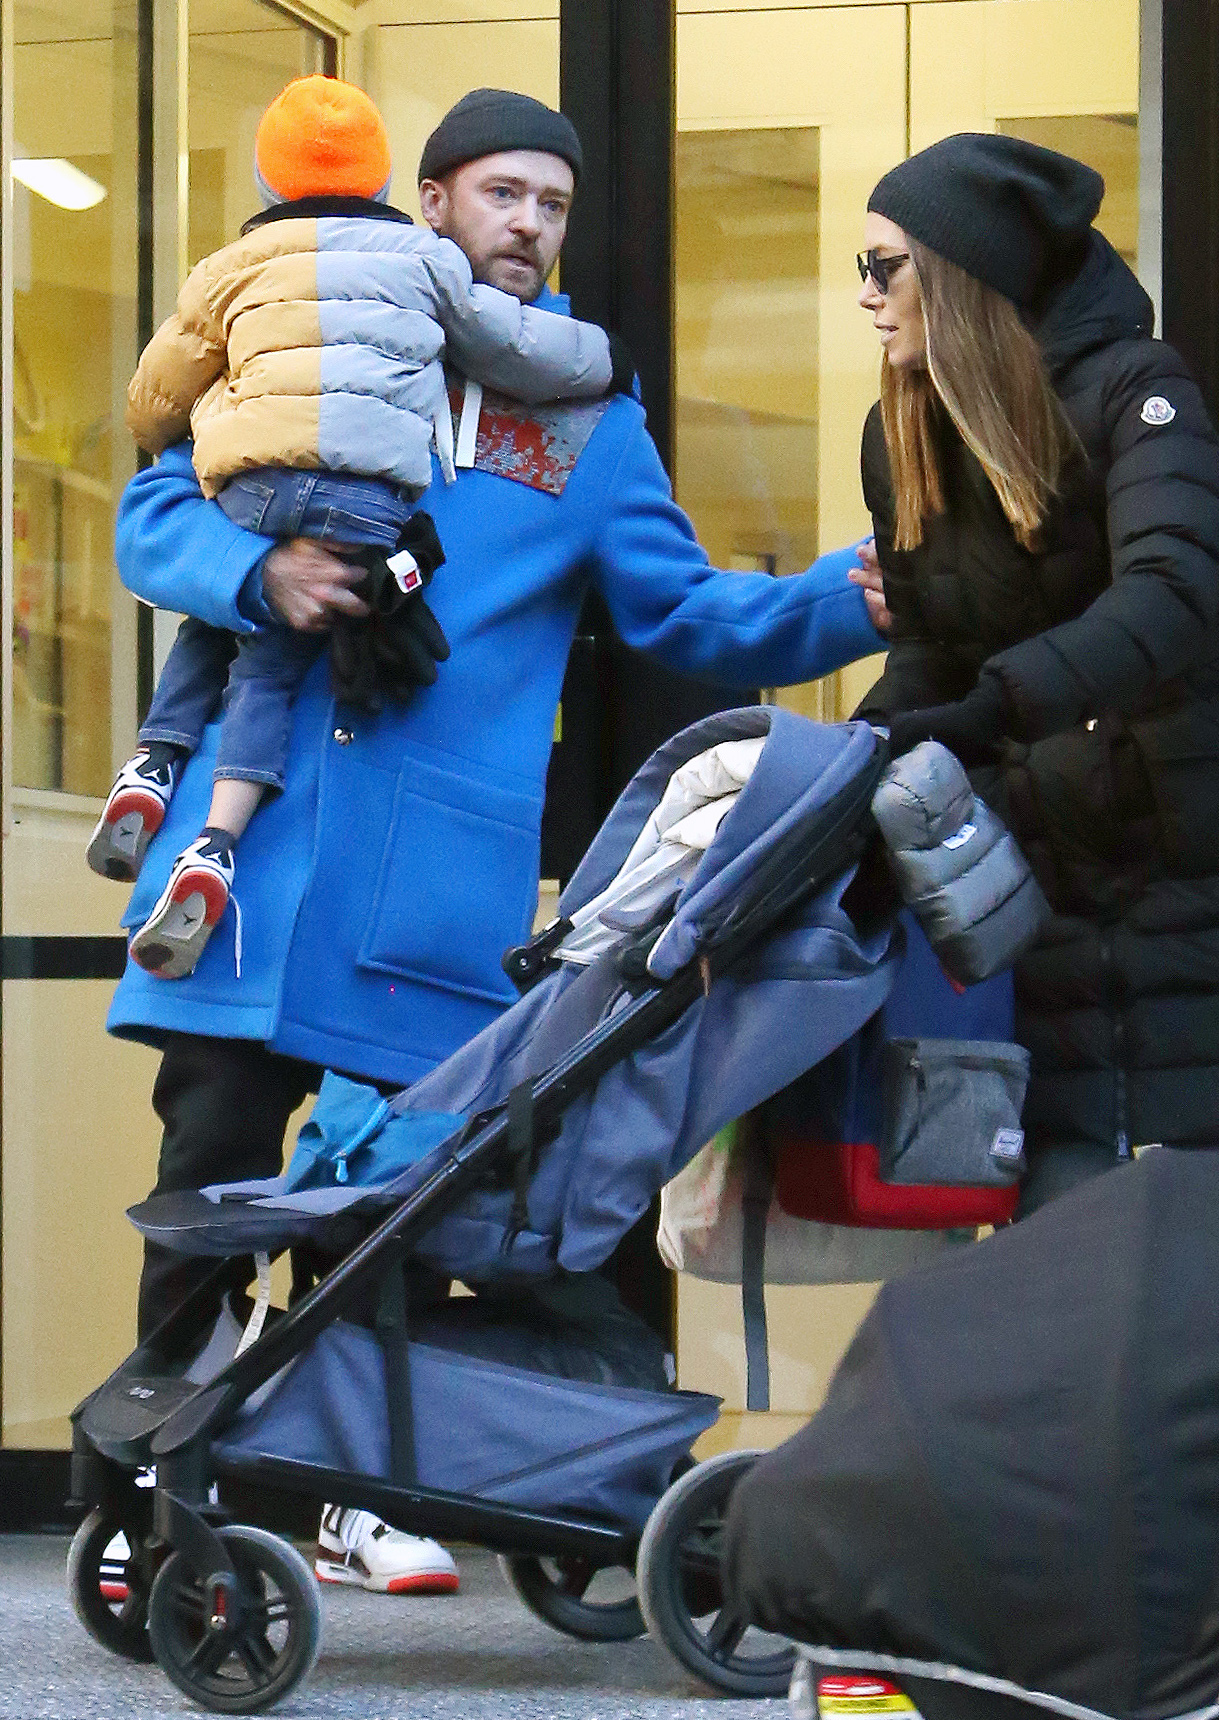 01/21/2020 EXCLUSIVE: Justin Timberlake and Jessica Biel step out as a family in New York City. The duo shared a kiss despite some reported turbulence in the relationship. Biel wore a beanie, Moncler puffer, ripped jeans, and Nike trainers. Timberlake sported a beanie, blue jacket, and Nike Air Jordans. 



 **VIDEO AVAILABLE**, Image: 494040998, License: Rights-managed, Restrictions: Exclusive NO usage without agreed price and terms. Please contact sales@theimagedirect.com, Model Release: no, Credit line: TheImageDirect.com / The Image Direct / Profimedia